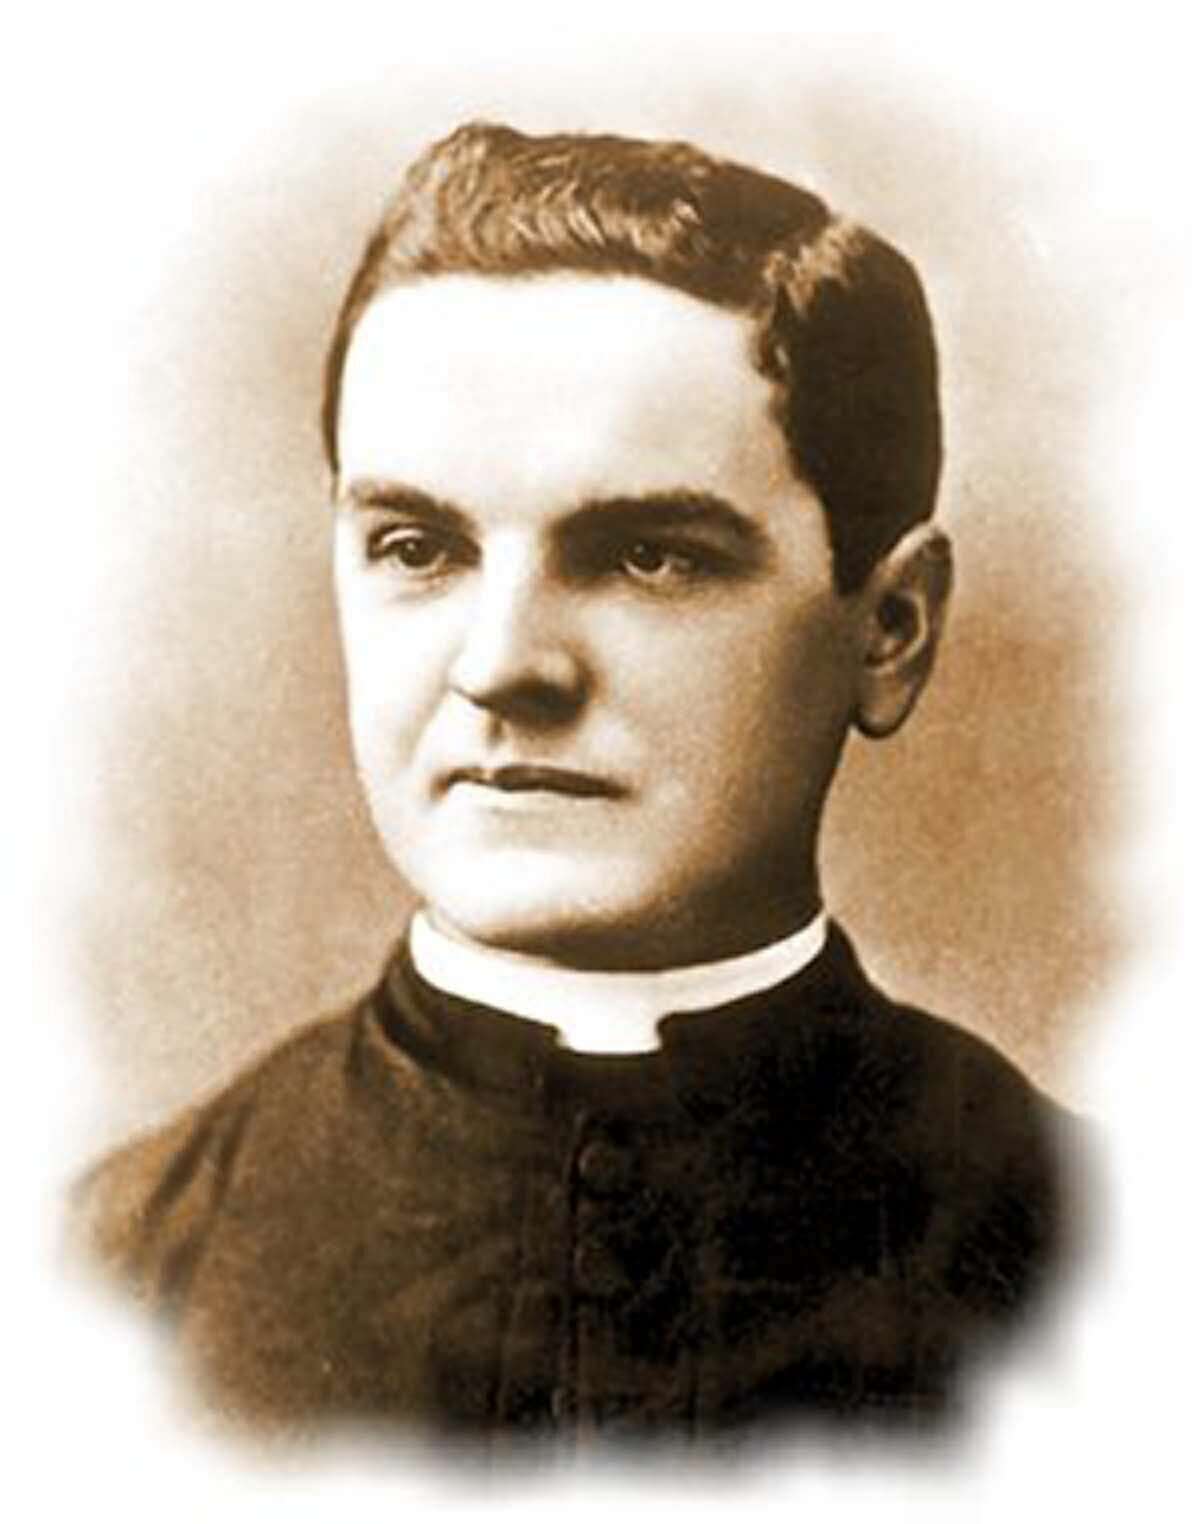 Before it left Connecticut in 1890, the Russian flu killed a 38-year-old priest named Michael J. McGivney. The priest had founded the Knights of Columbus and has recently been considered for sainthood. Last spring, Pope Francis recognized a miracle attributed to him. According to the Knights of Columbus, a pregnant mother prayed to him in 2015 and was healed of a condition that threatened the pregnancy. McGivney needs to be credited with one more miracle before he can be declared a saint. Here’s hoping his next miracle is getting Connecticut out of the pandemic.